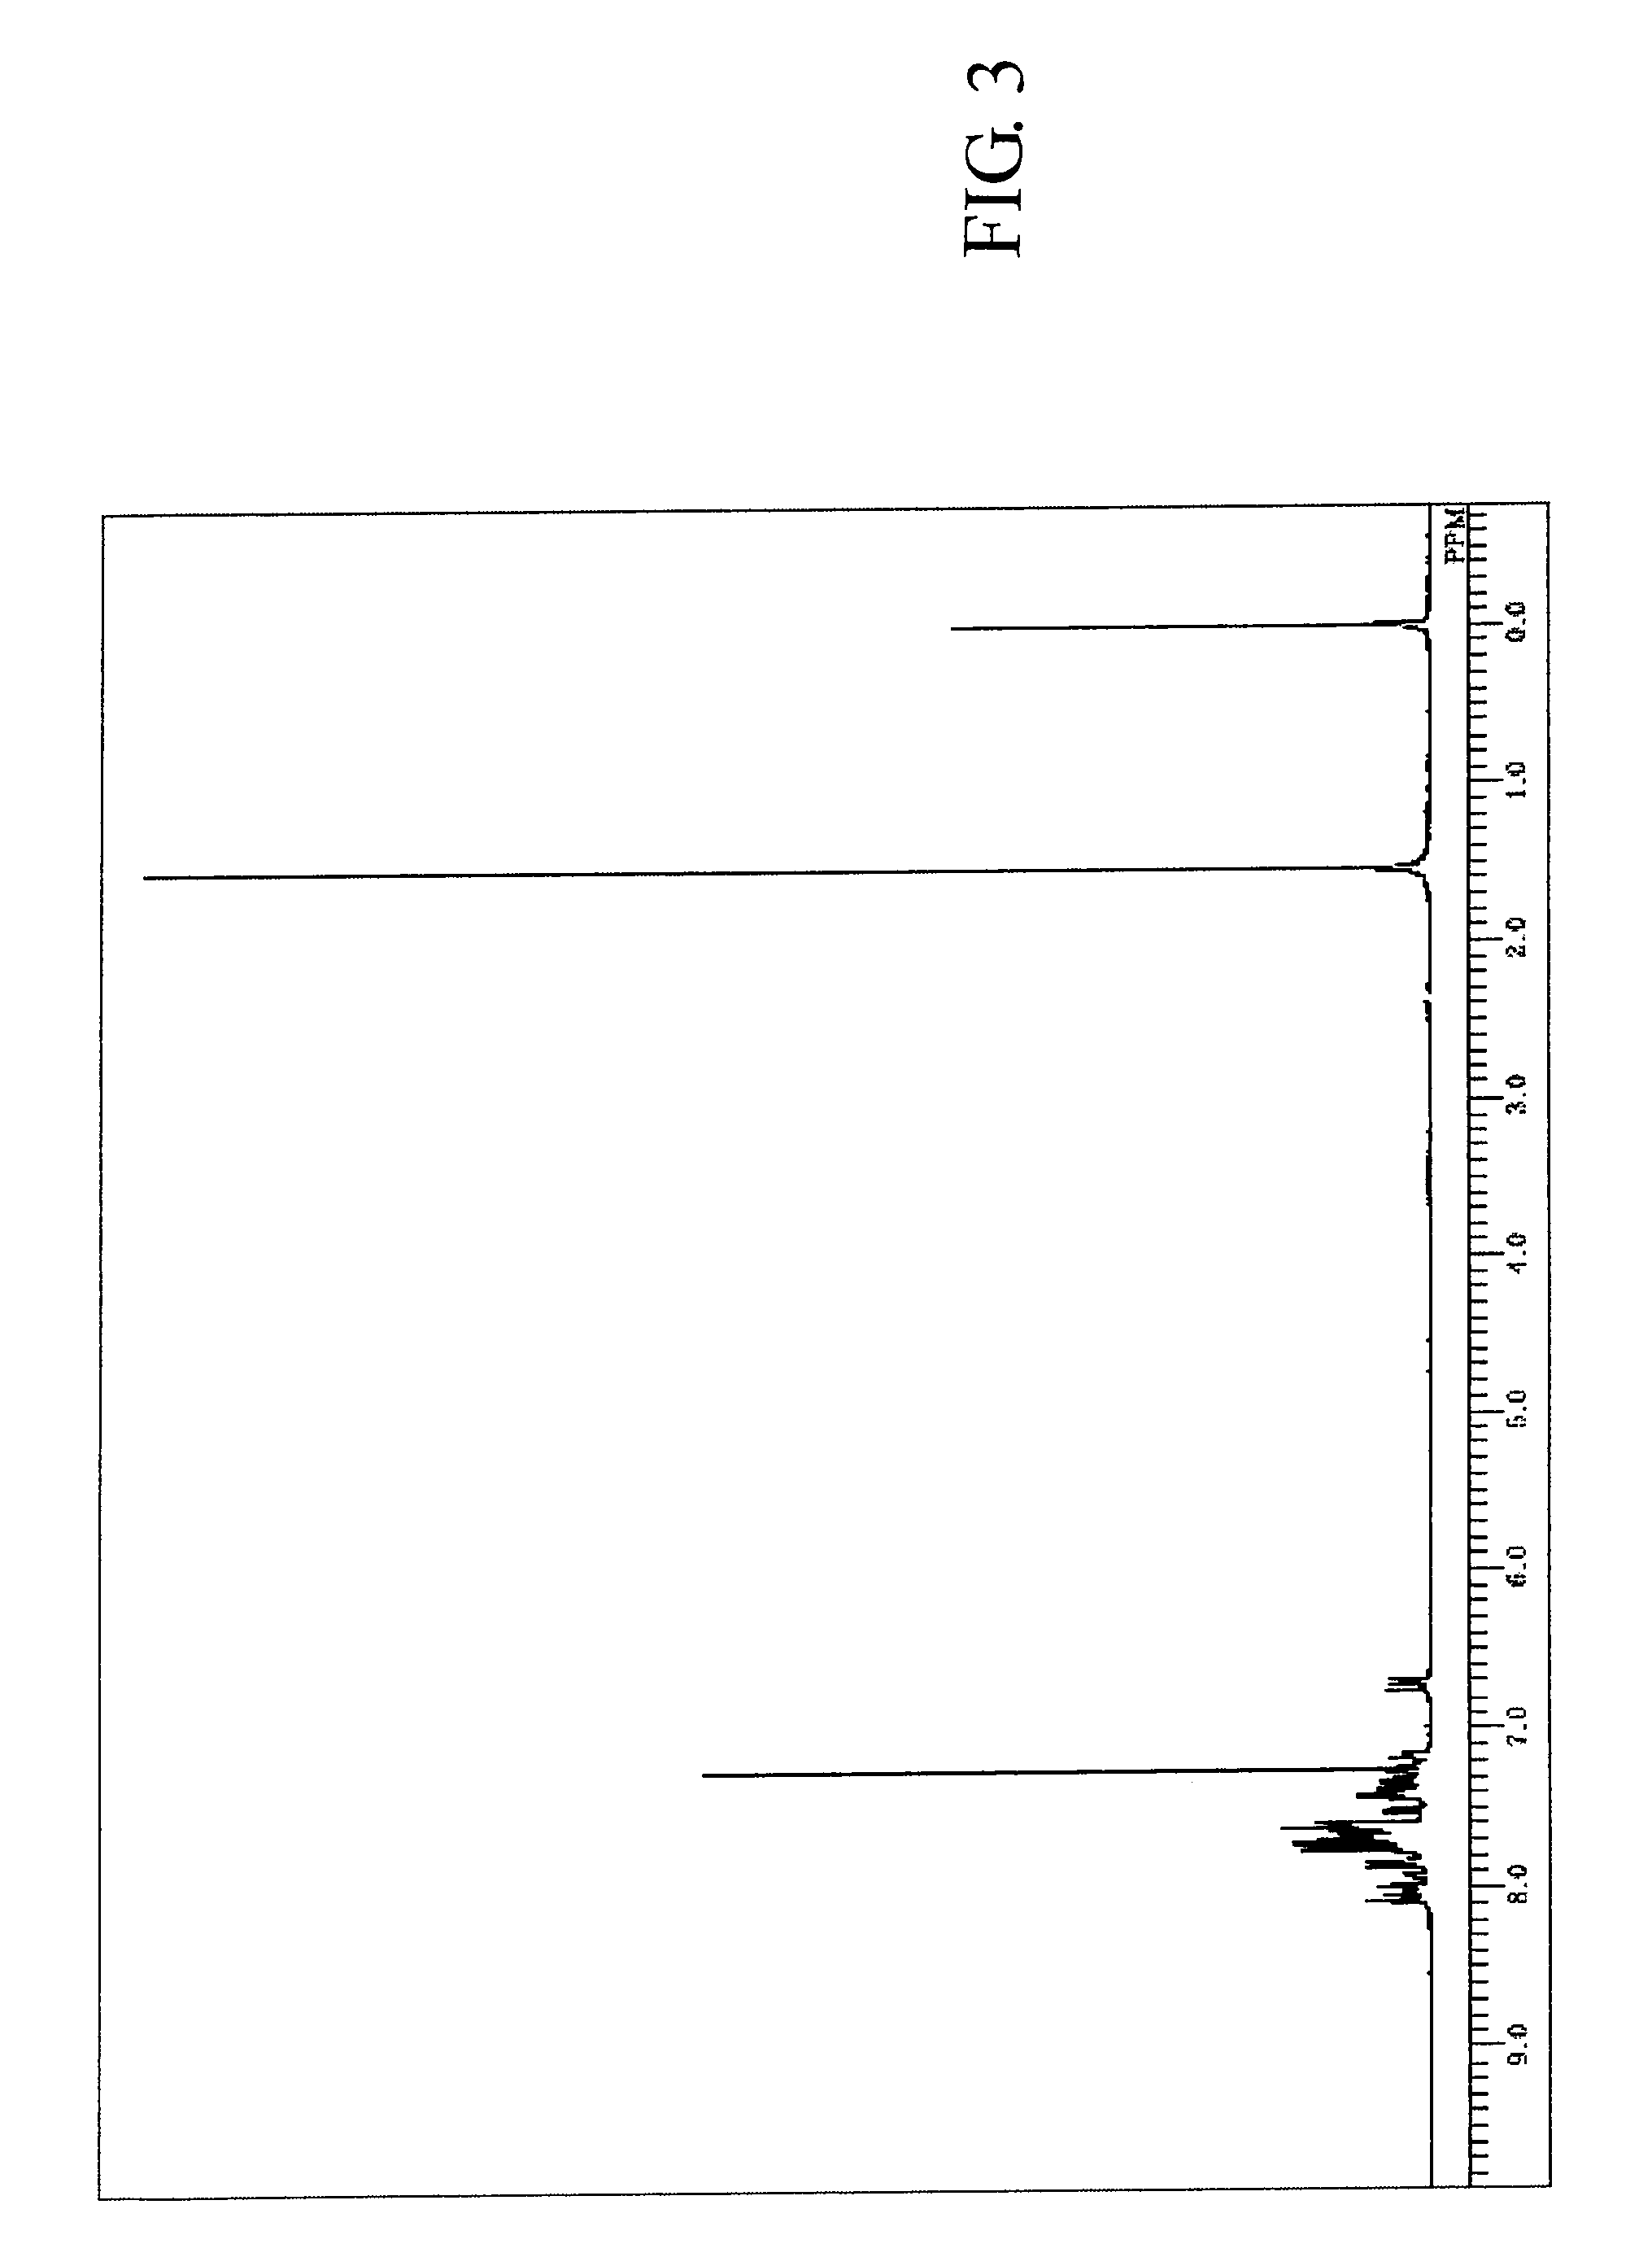 Fluoranthene compound, organic electroluminescence device using the same, and solution containing organic electroluminescence material